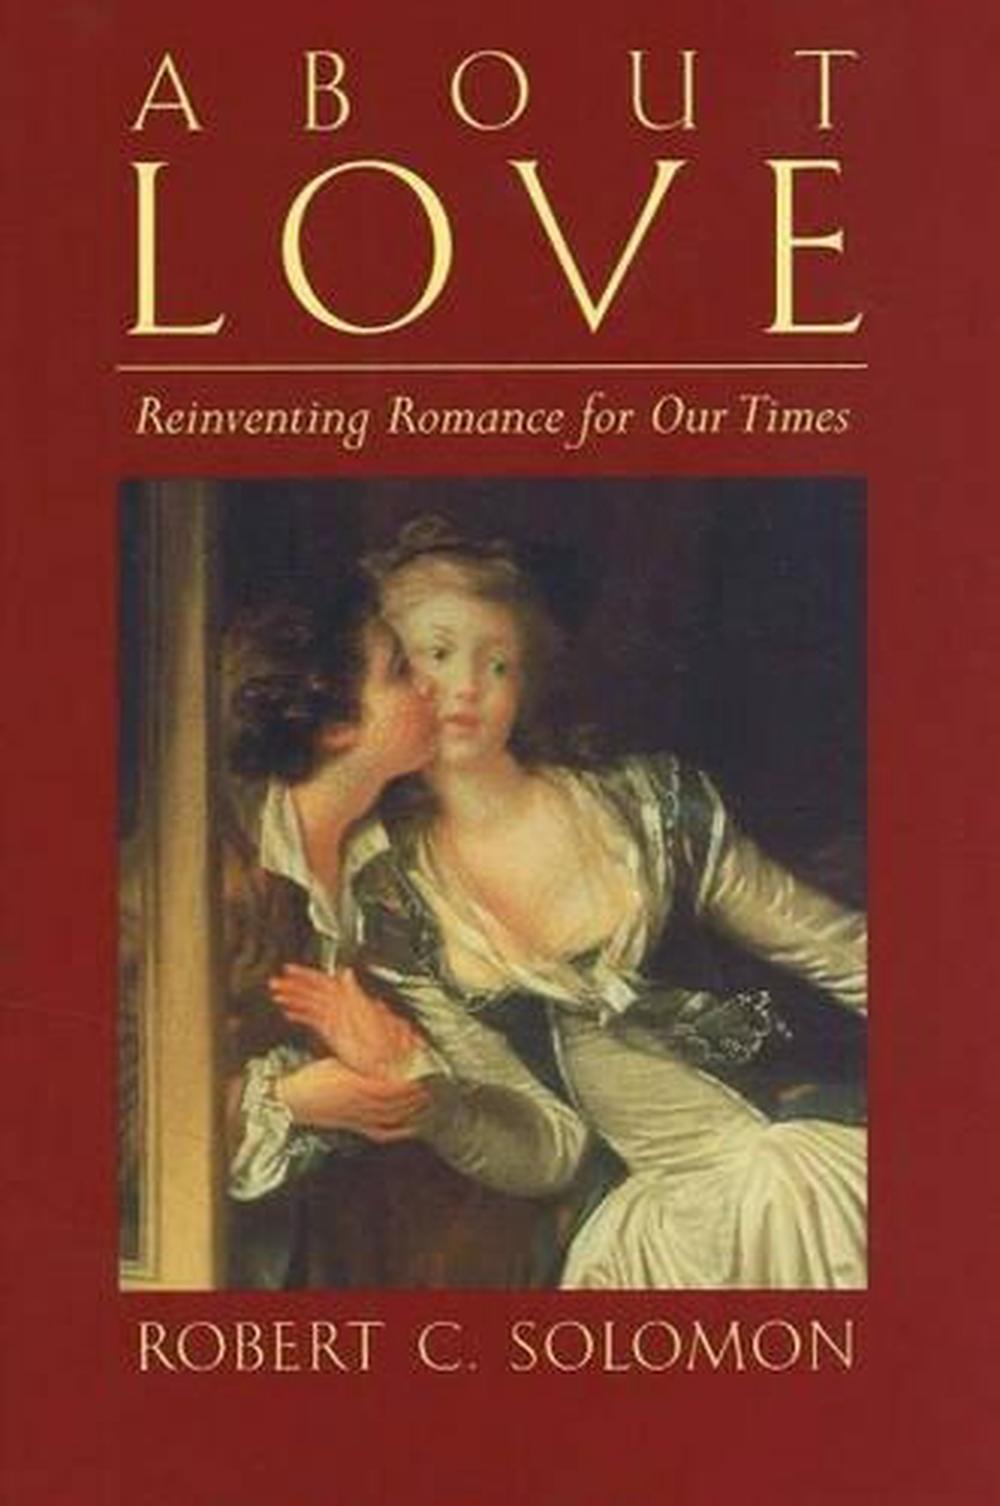 About Love Reinventing Romance for our Times by Robert C. Solomon